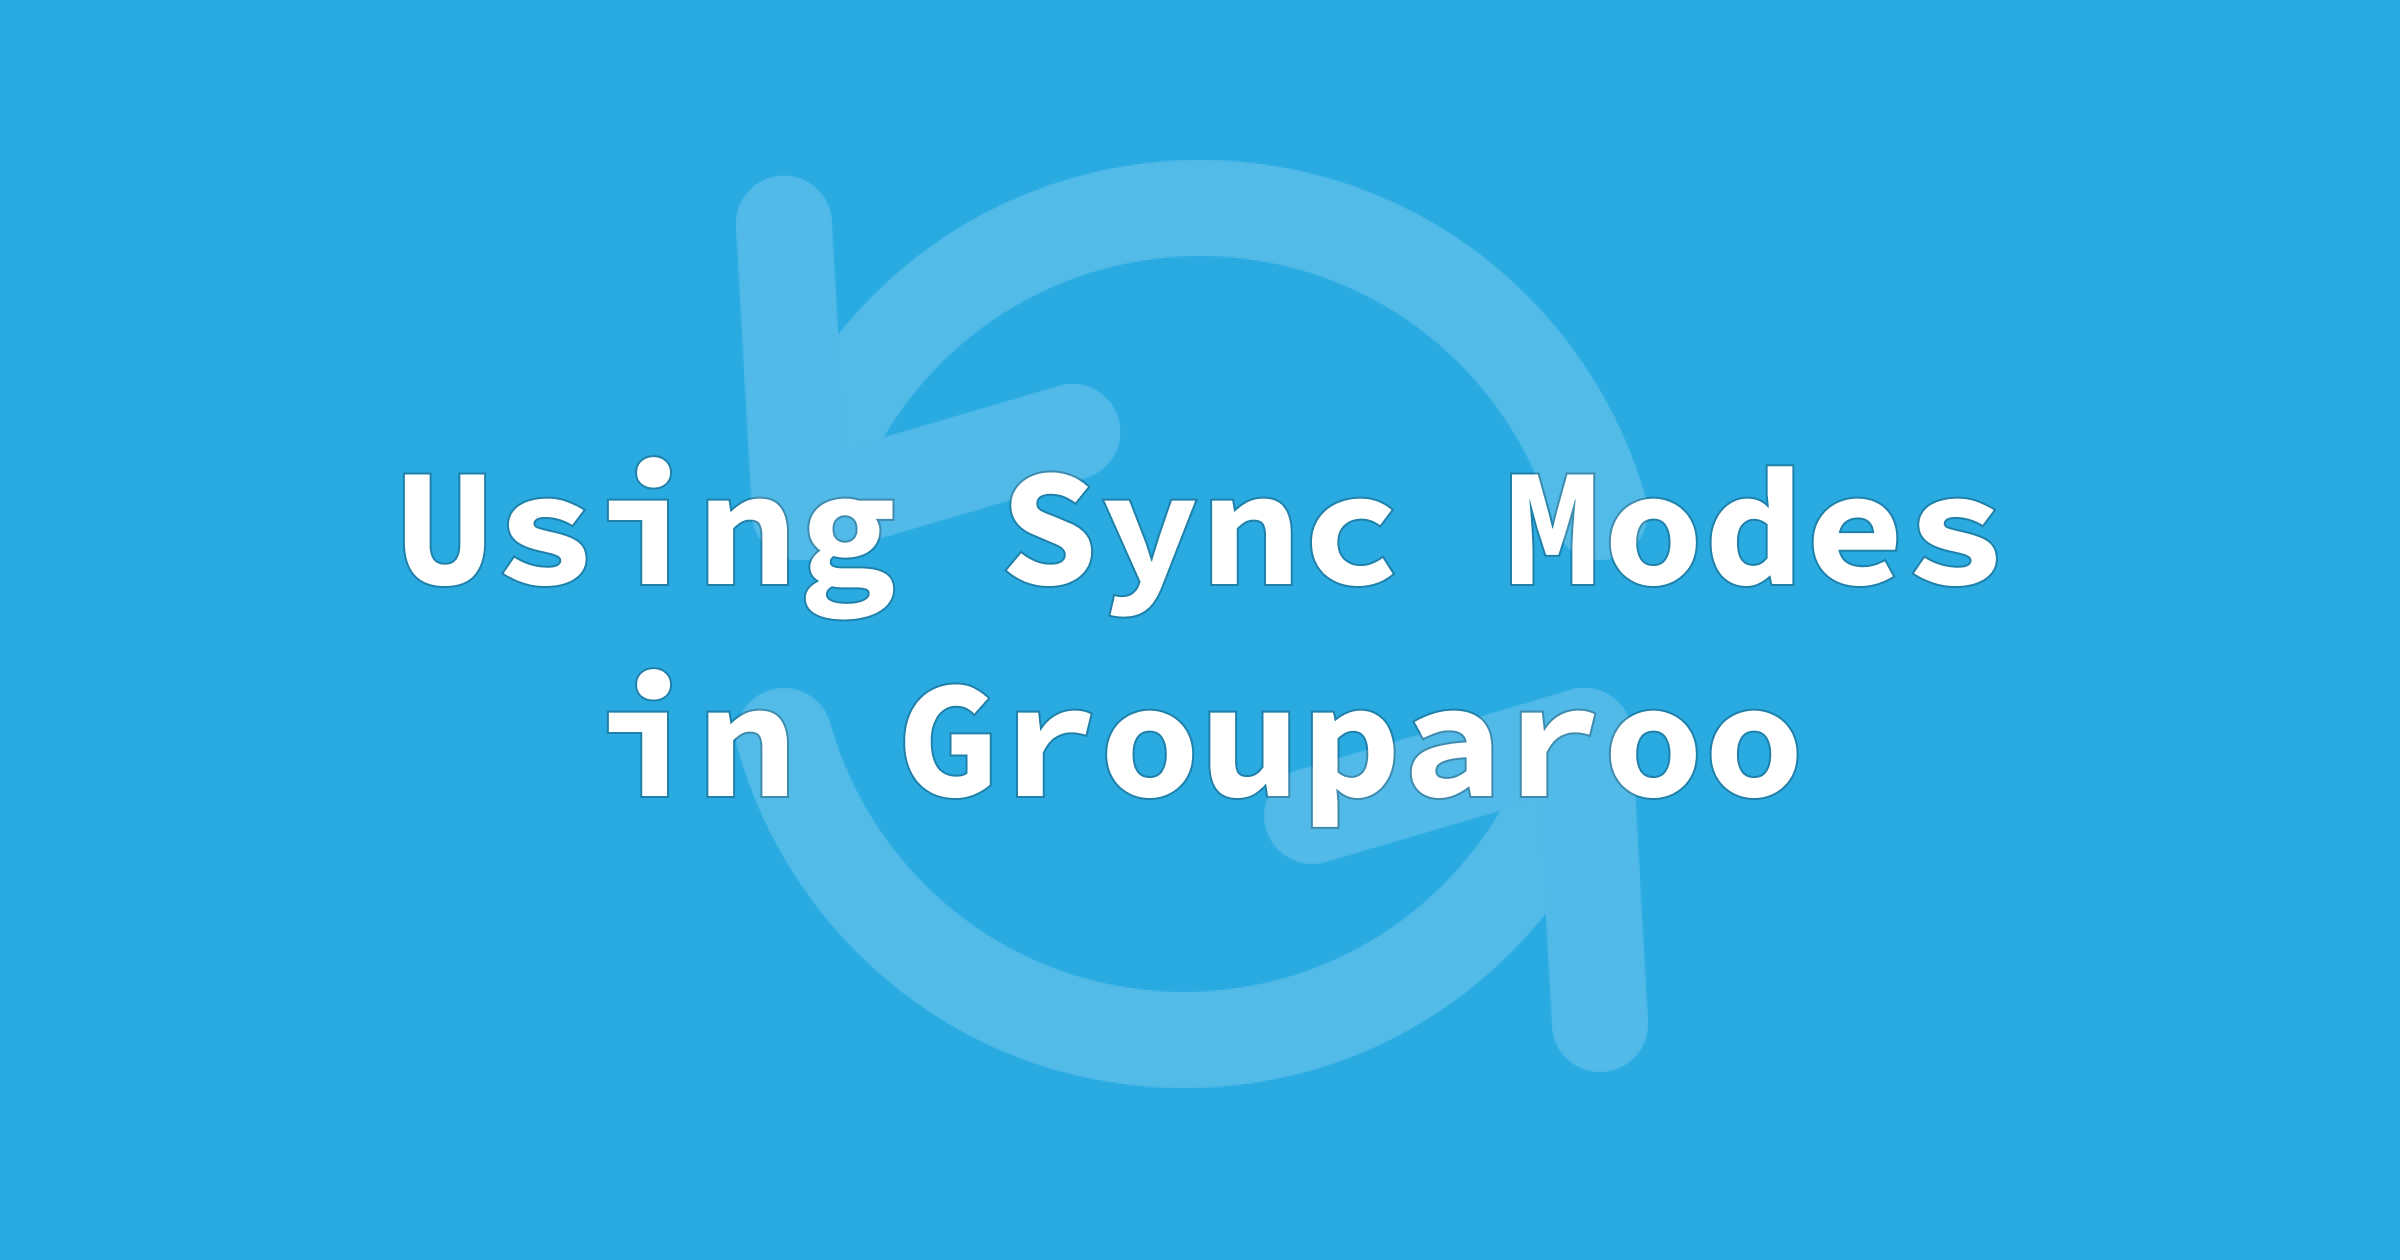 Using sync modes in Grouparoo